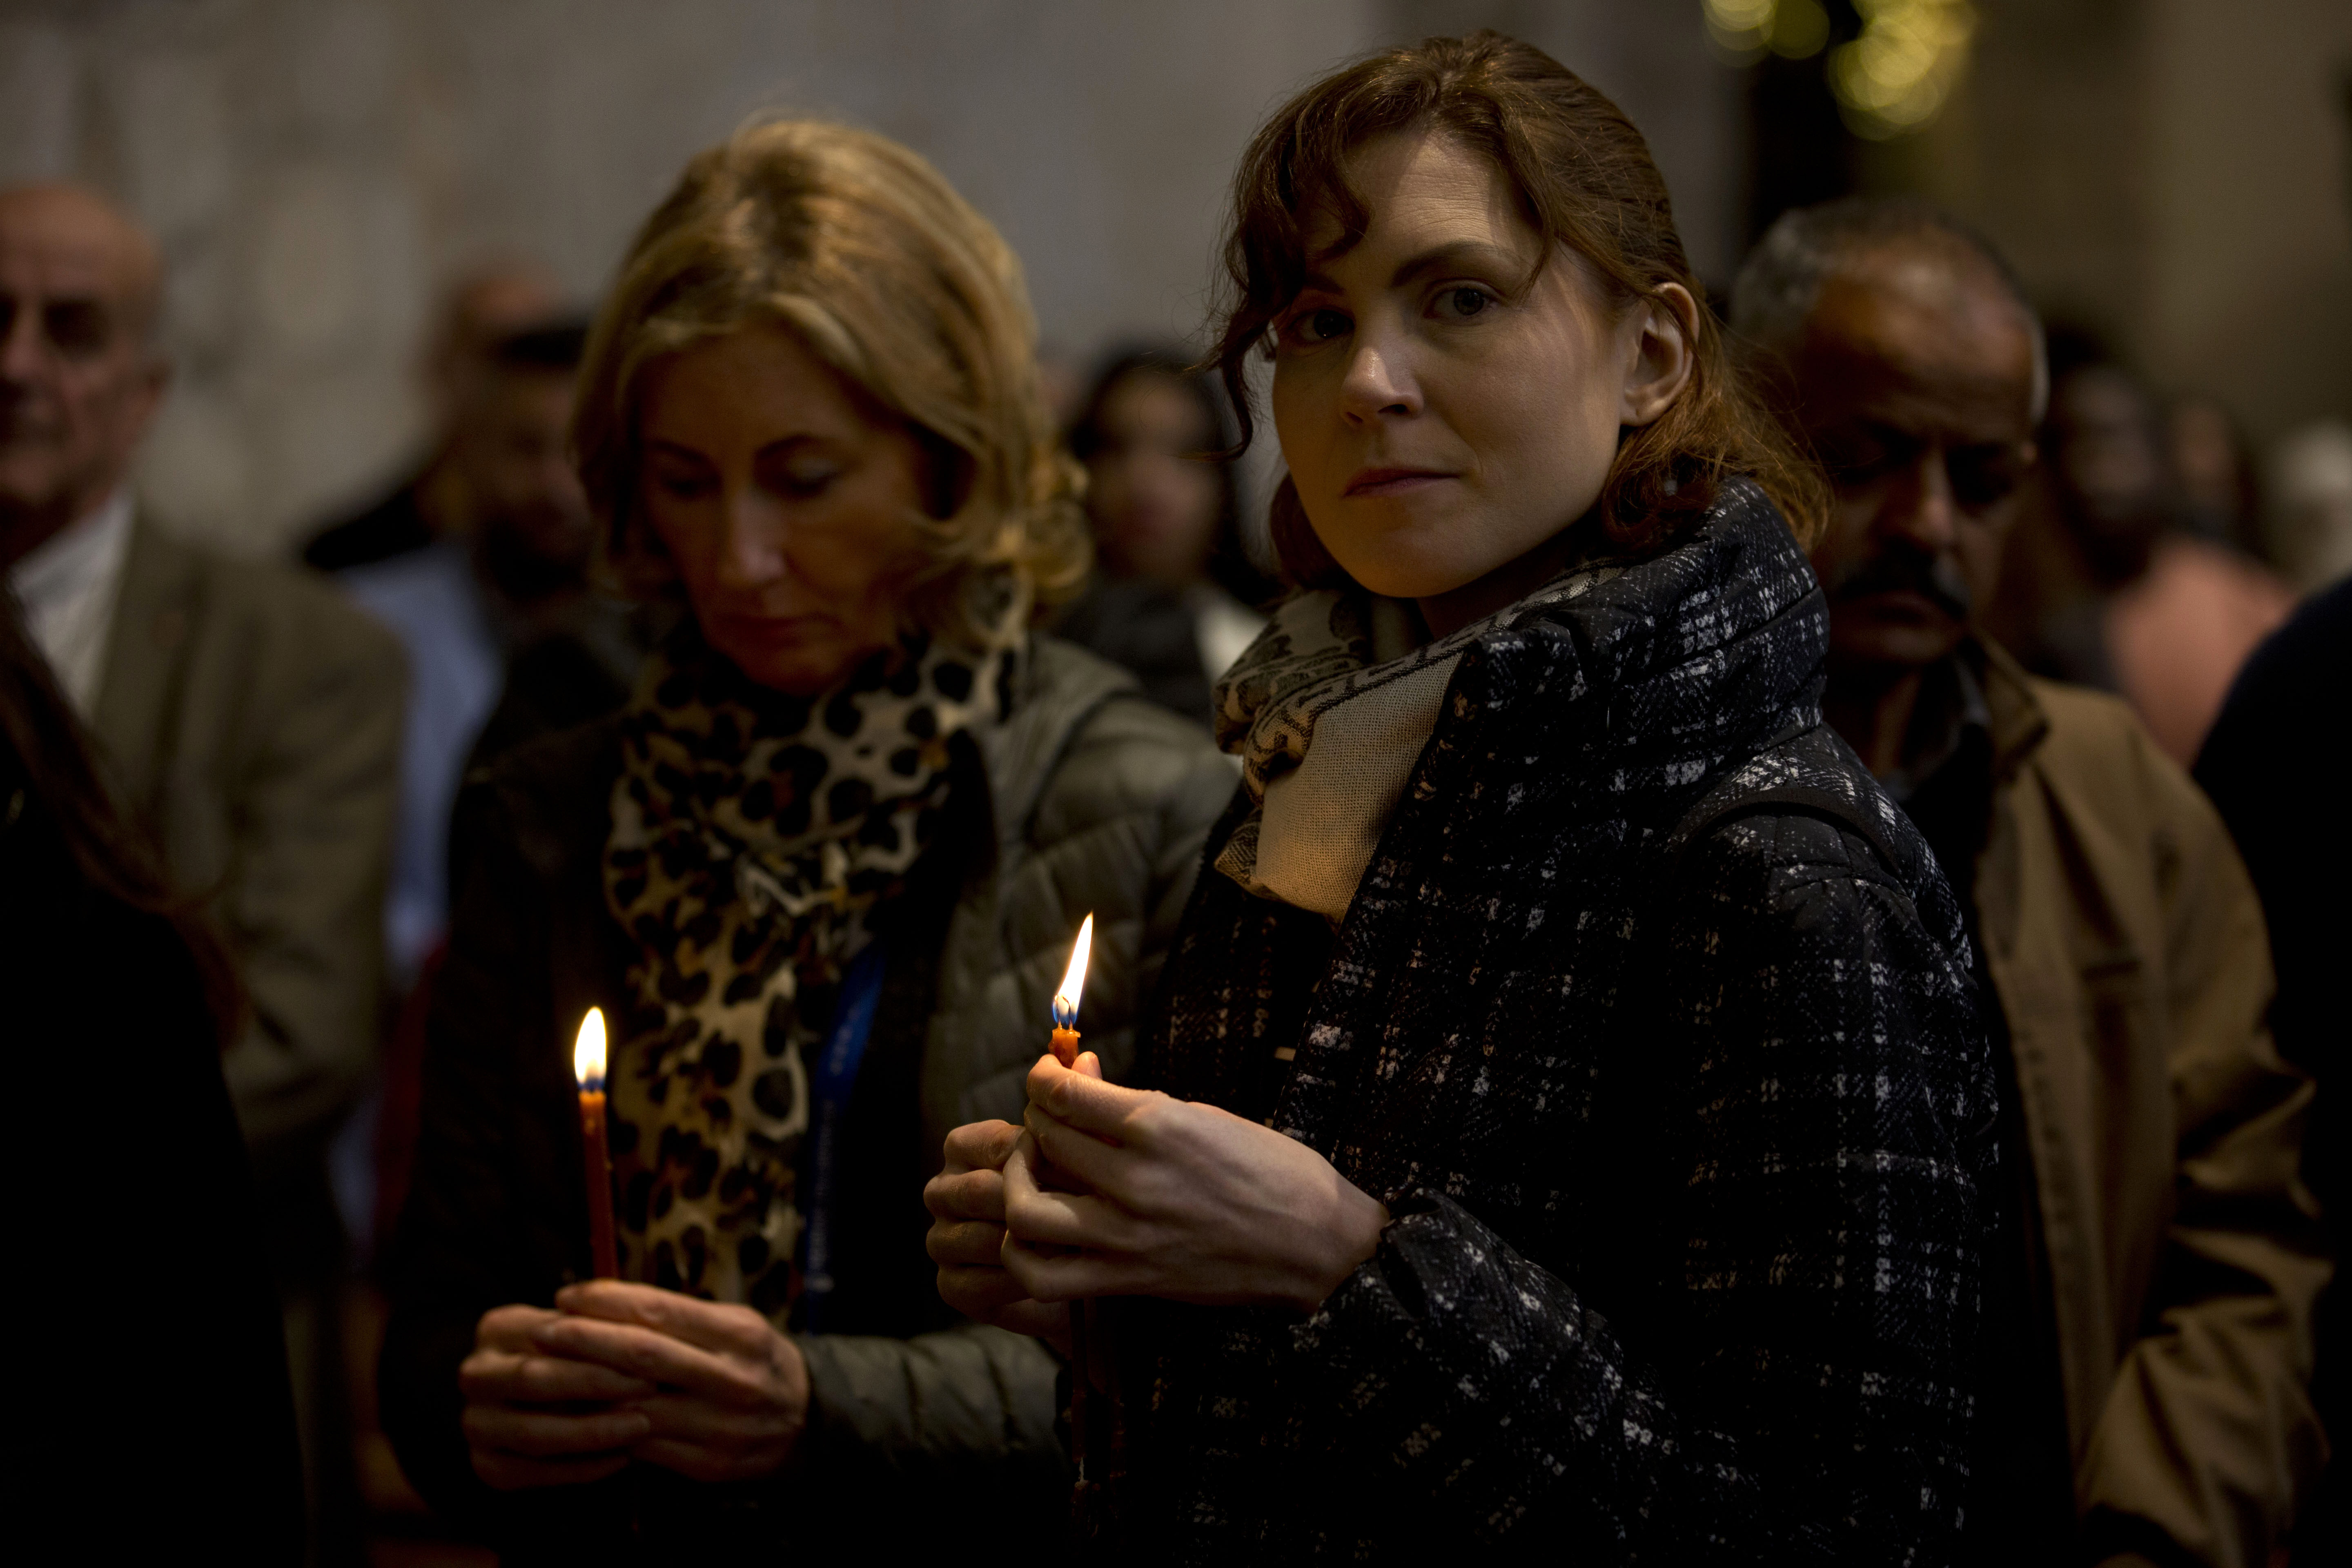 Worshiper hold candles and pray during a Christmas day Mass at the Church of the Nativity, traditionally believed to be the birthplace of Jesus Christ, in the West Bank town of Bethlehem, Wednesday, Dec. 25, 2019. (AP Photo/Majdi Mohammed)